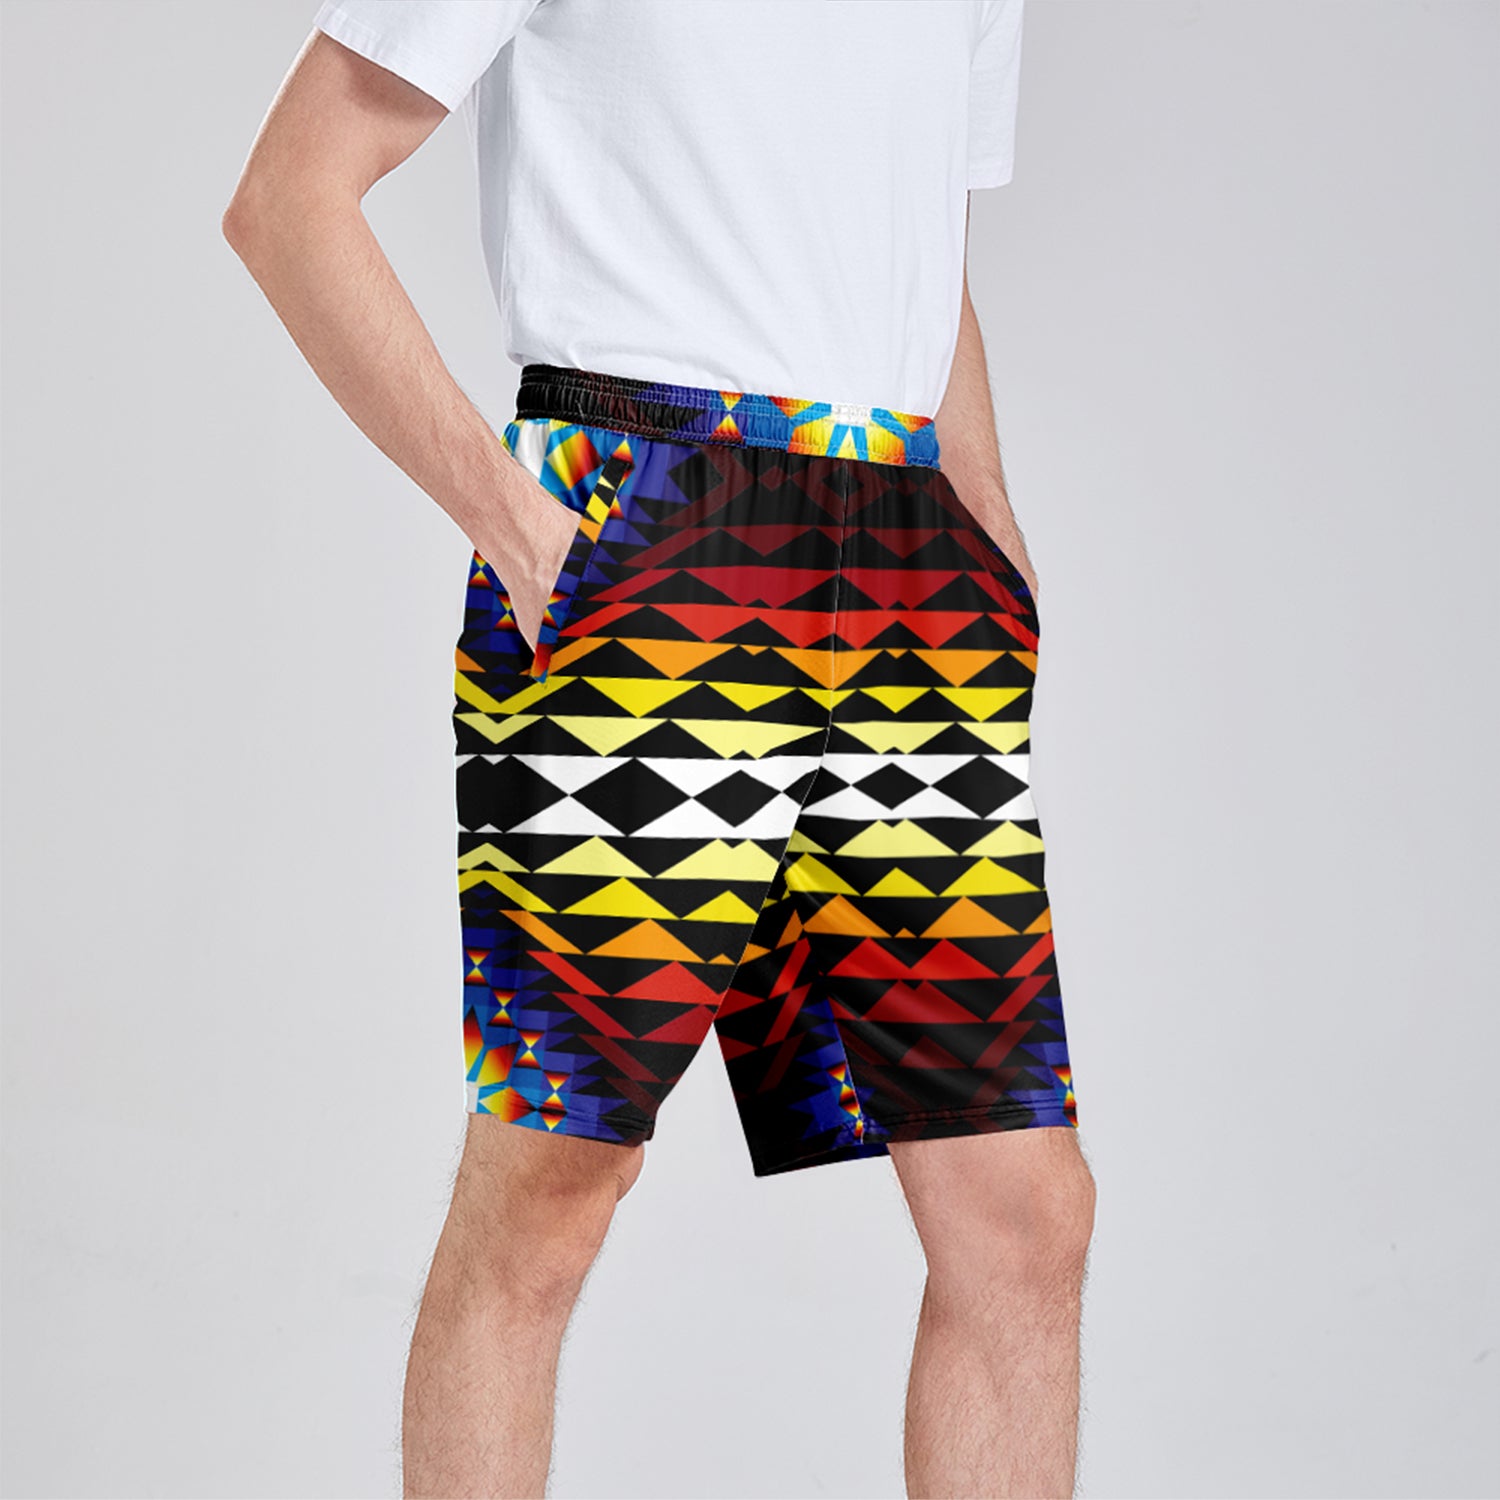 Sunset Blanket Athletic Shorts with Pockets